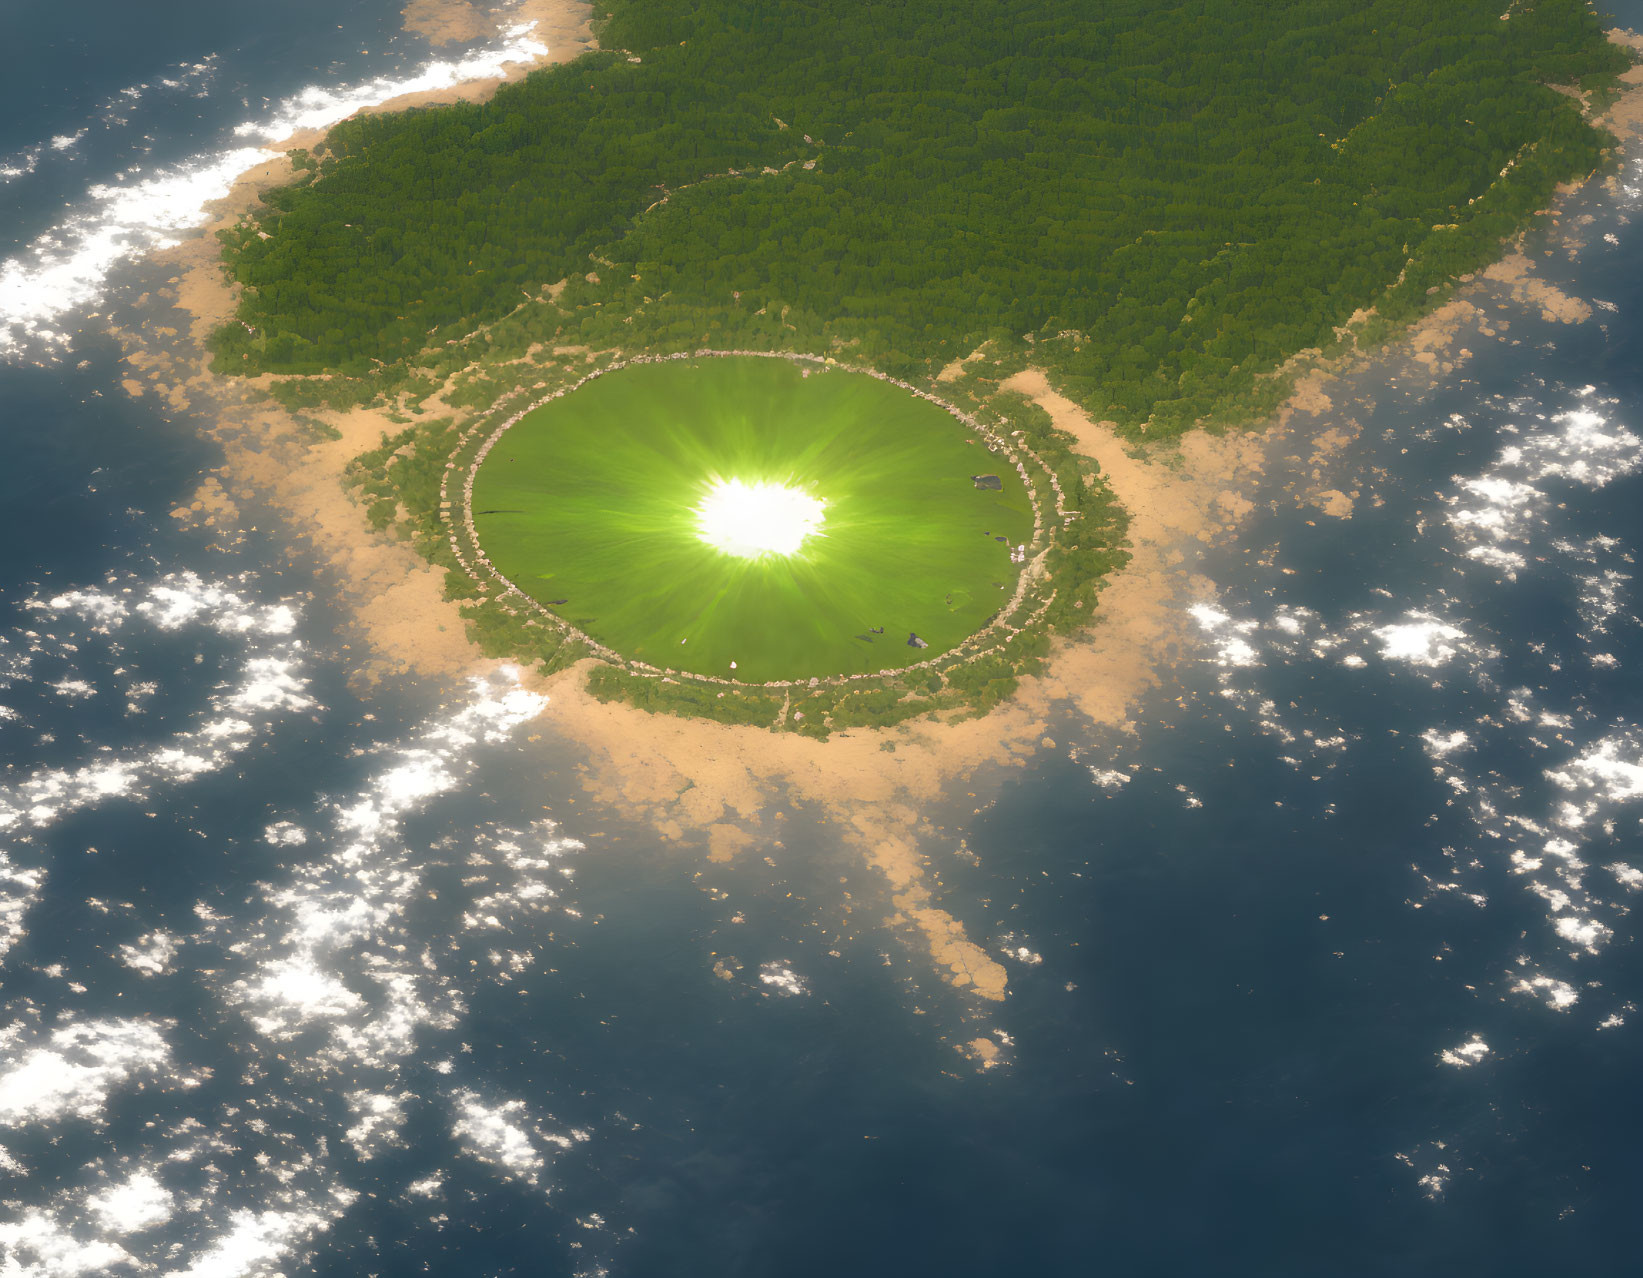 Circular green landform with forest ring and radiant center, ocean clouds.